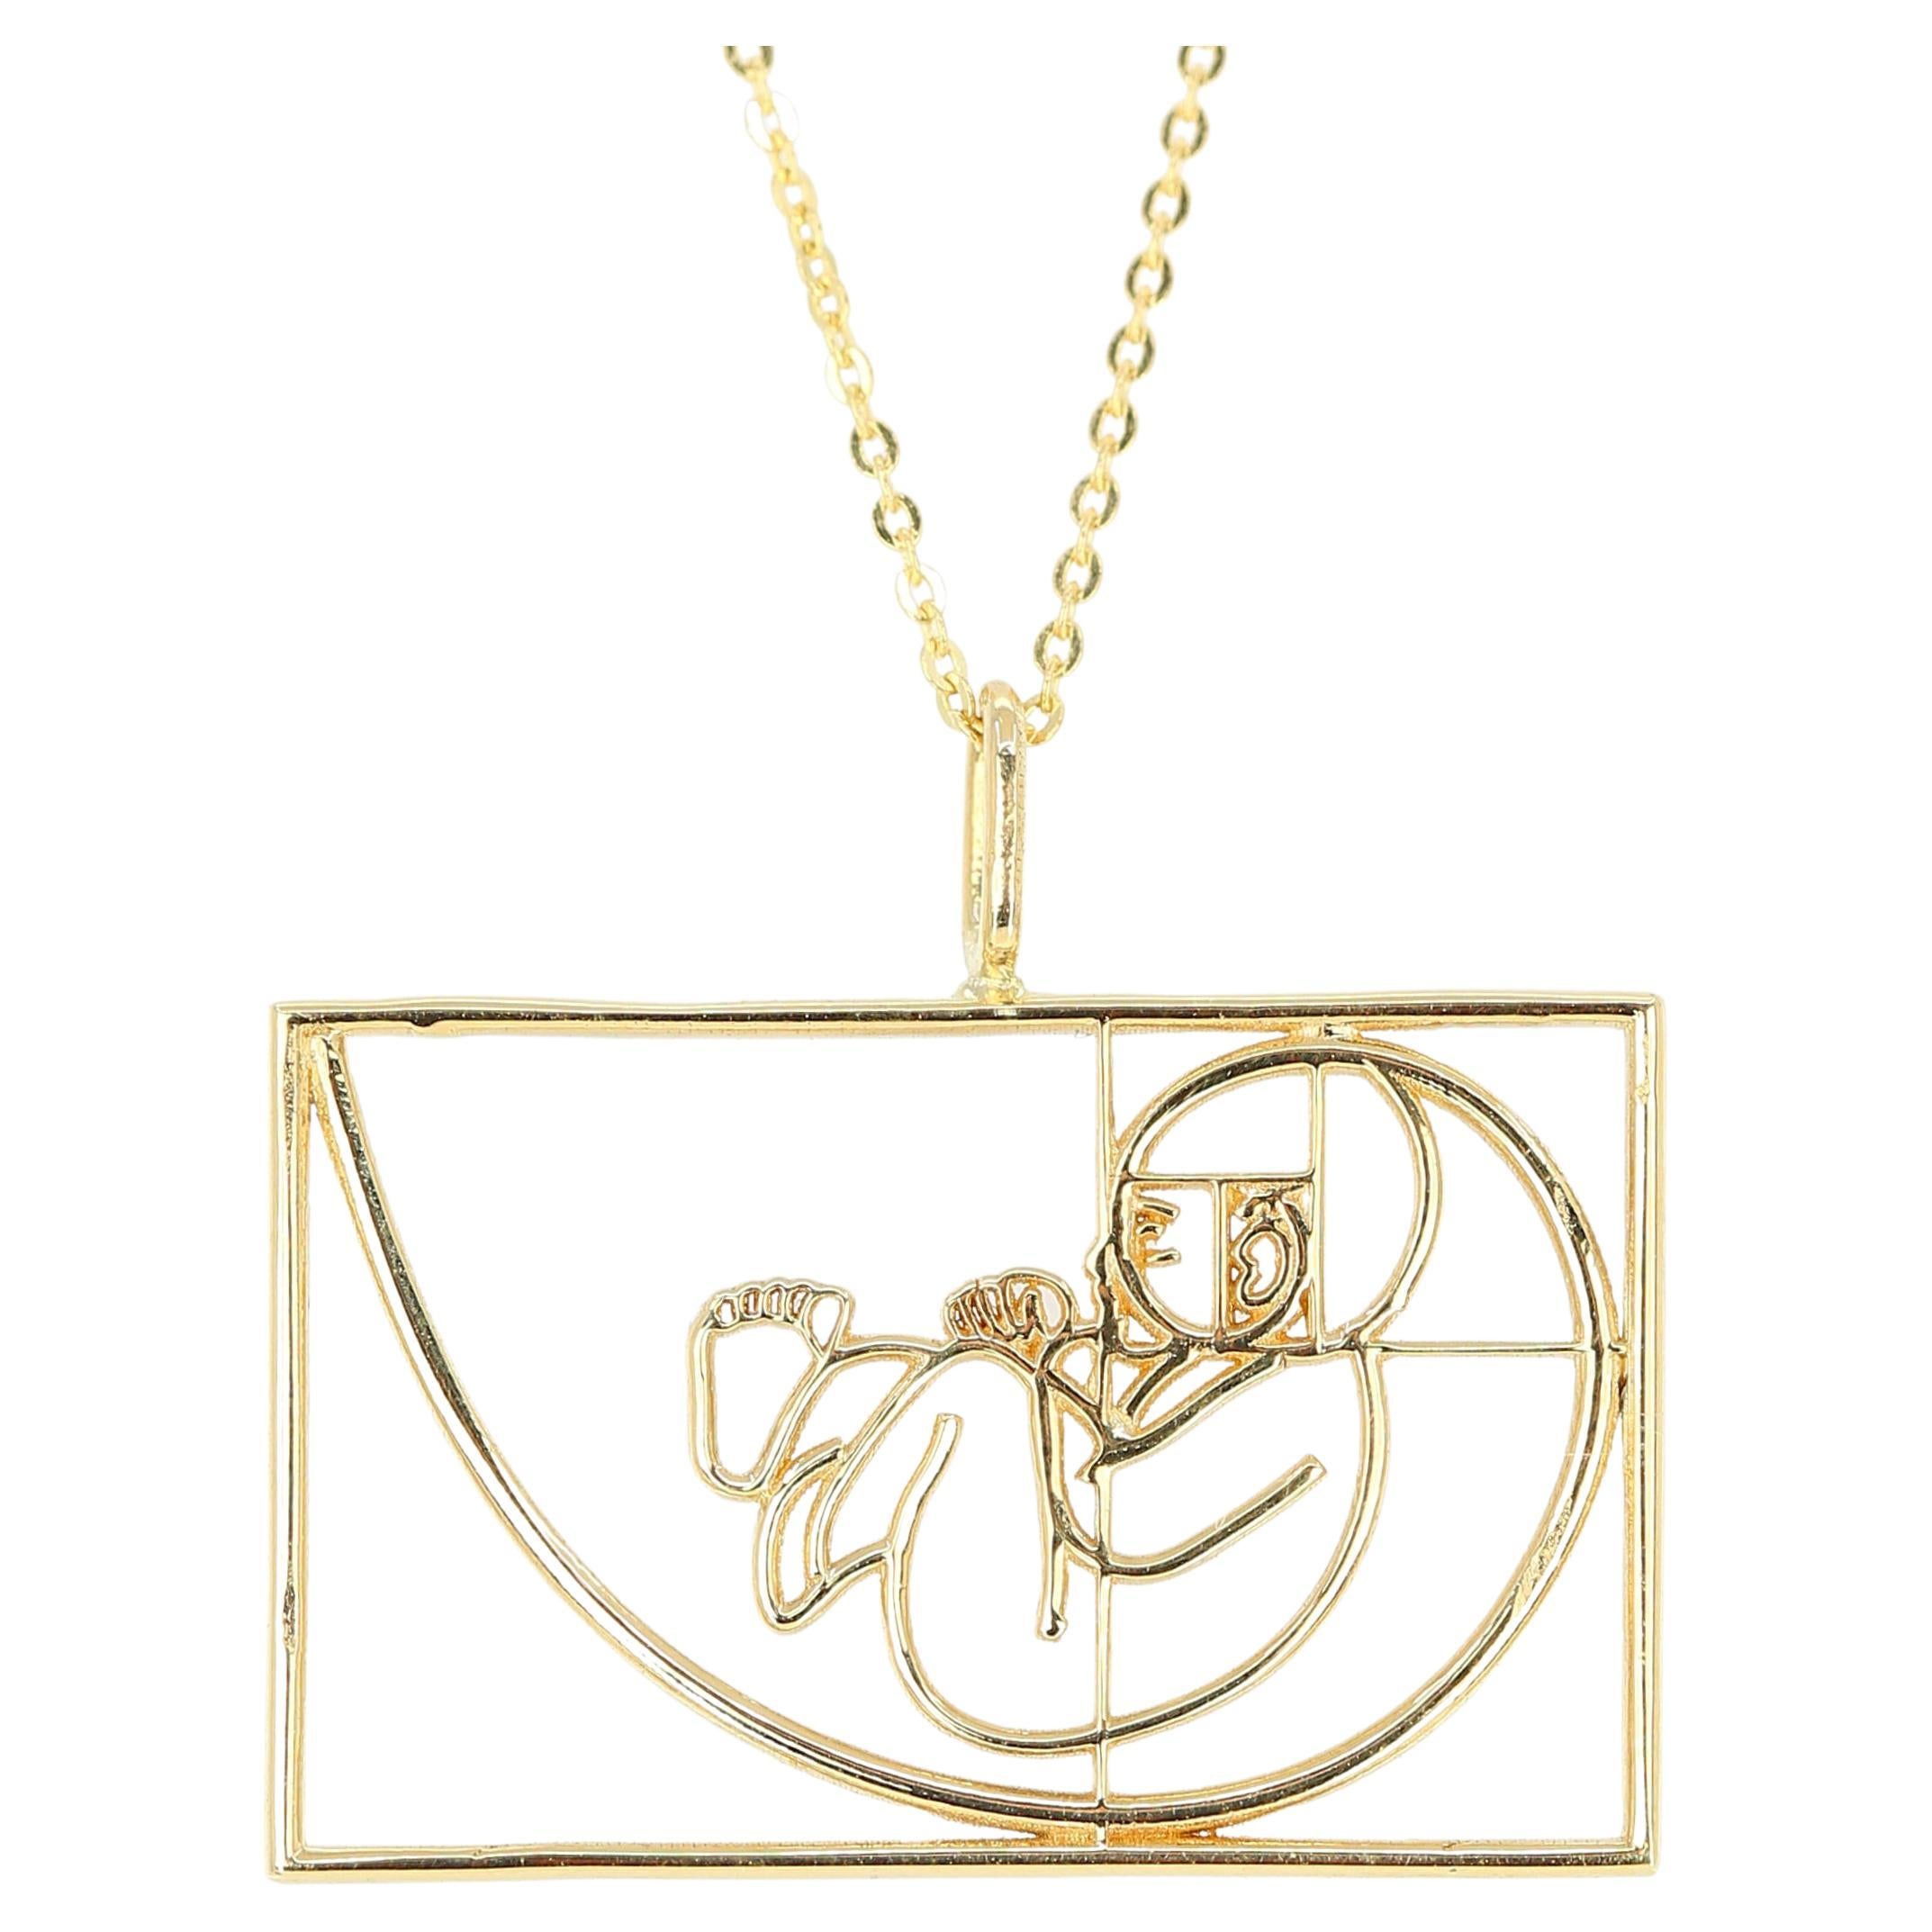 Baby in the Womb Necklace with Pendant 14K Gold, Golden Ratio Necklace